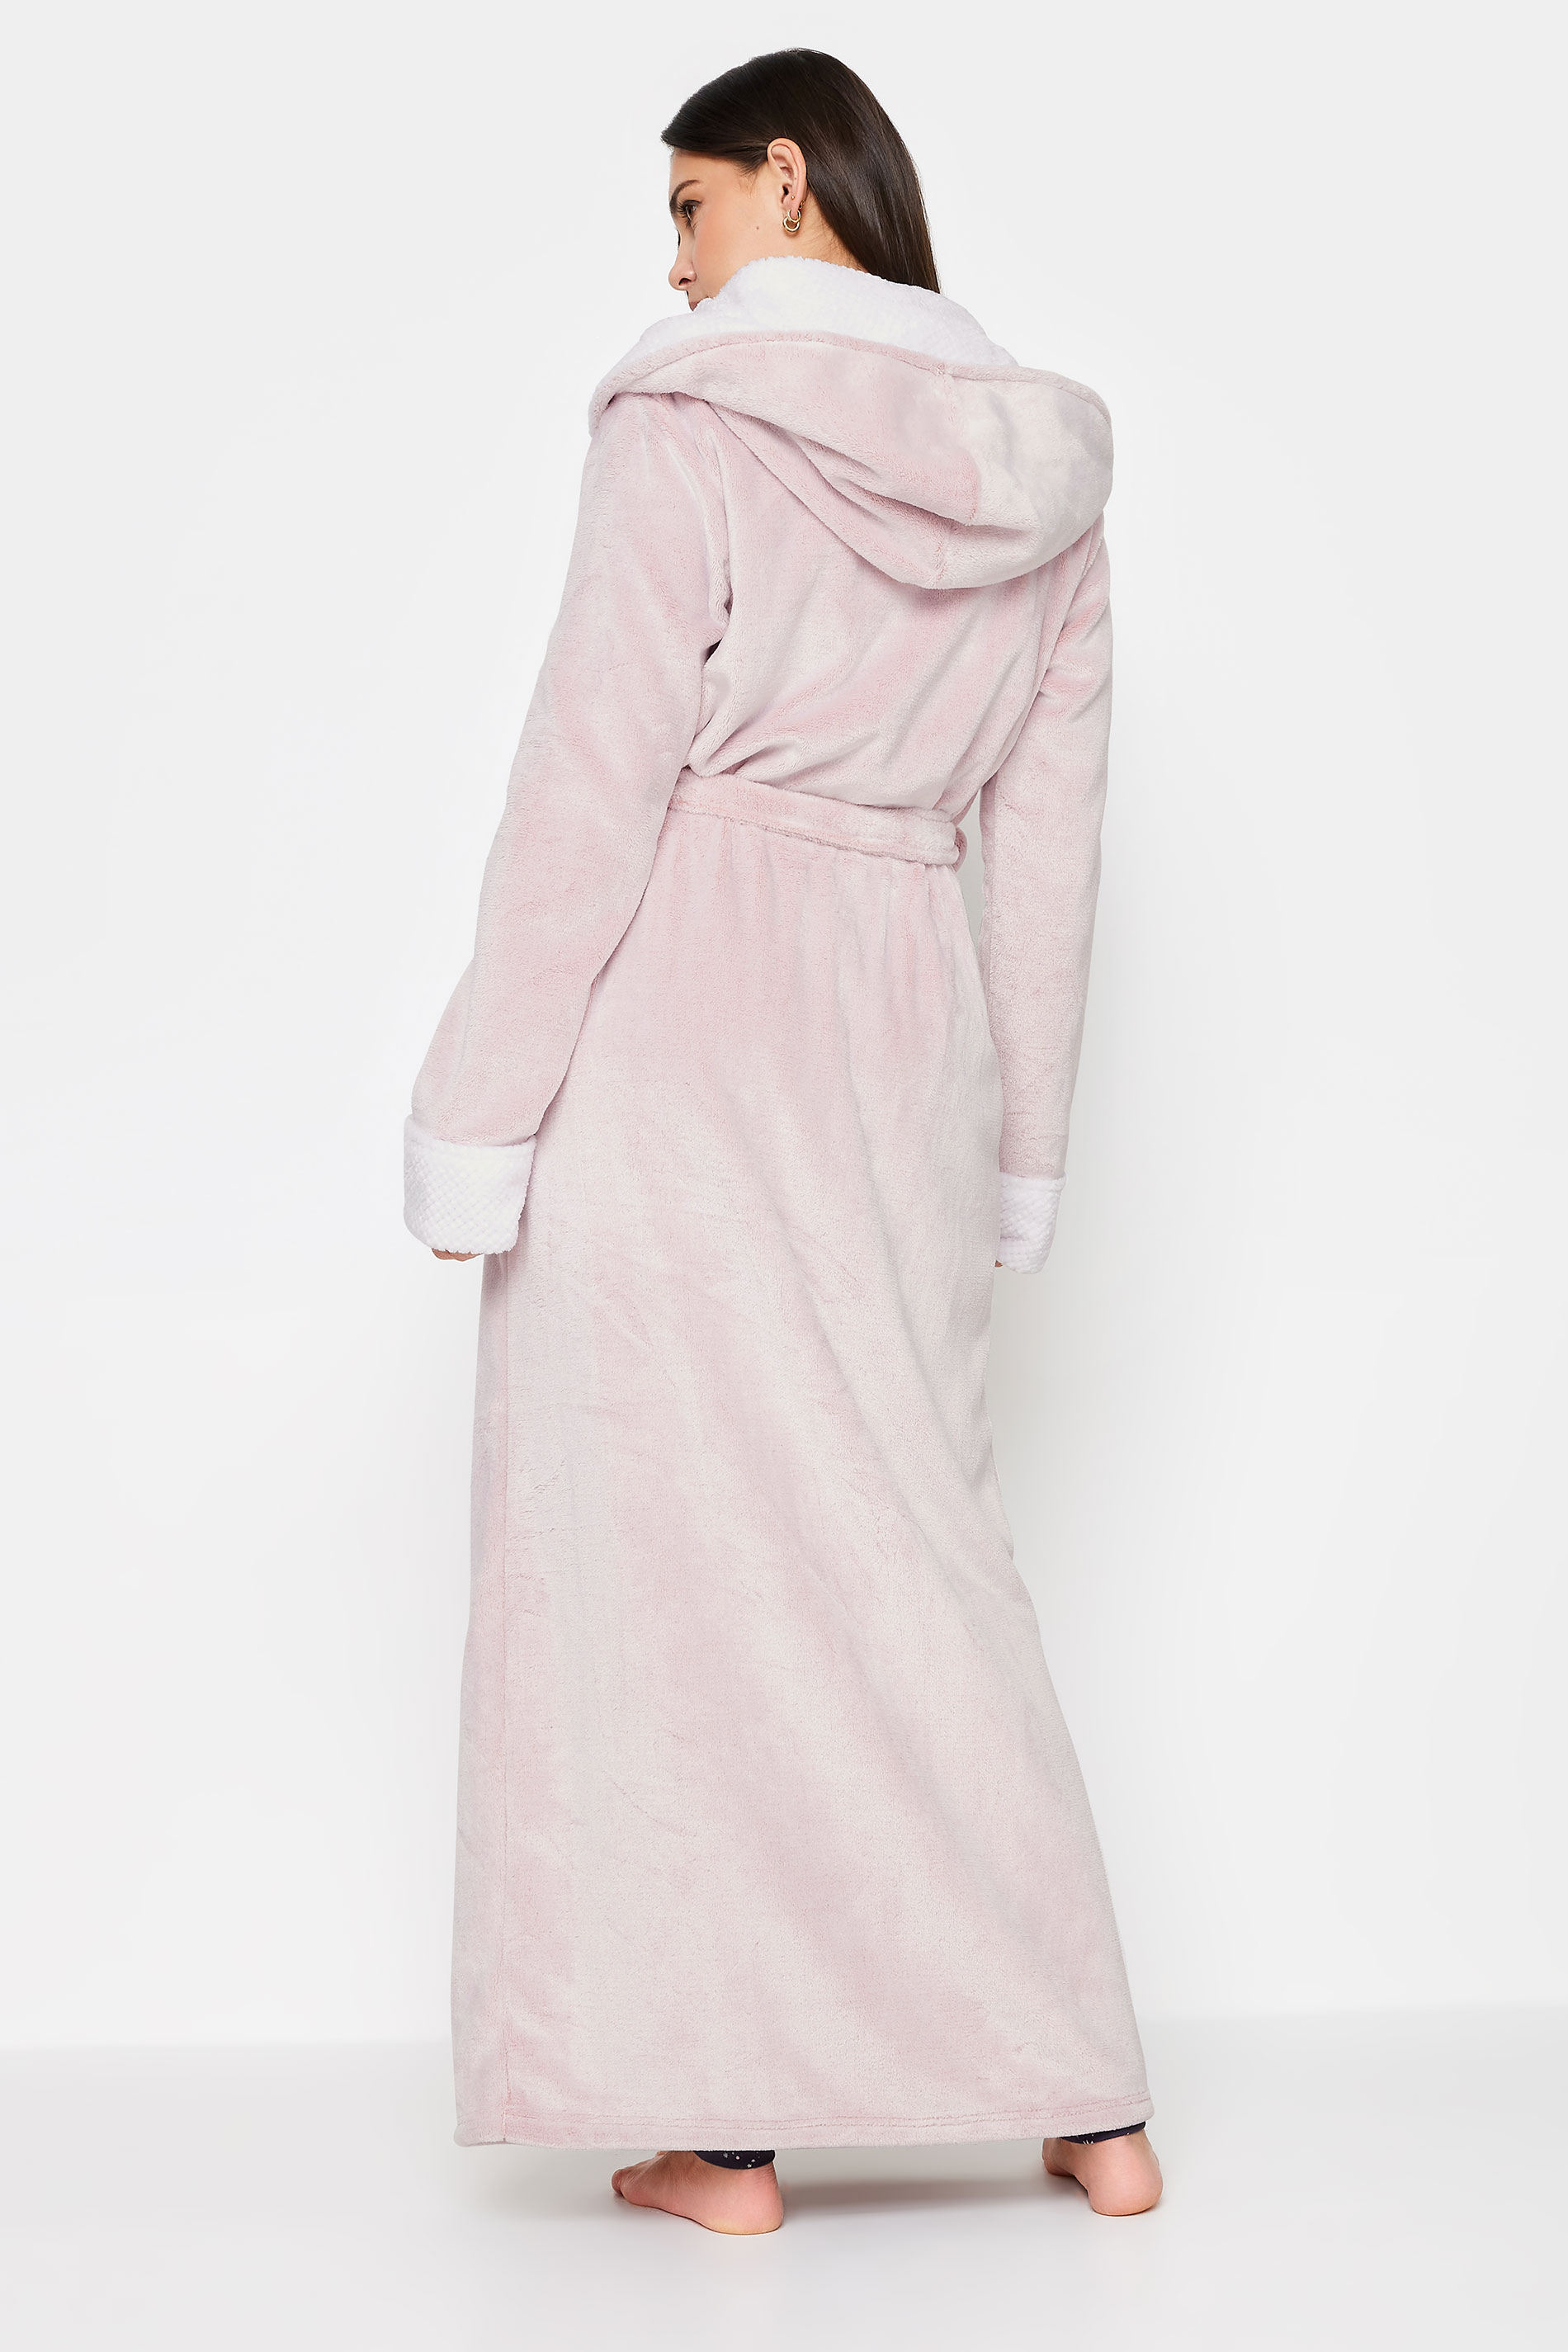 LTS Tall Light Pink Hooded Maxi Dressing Gown | Long Tall Sally  3